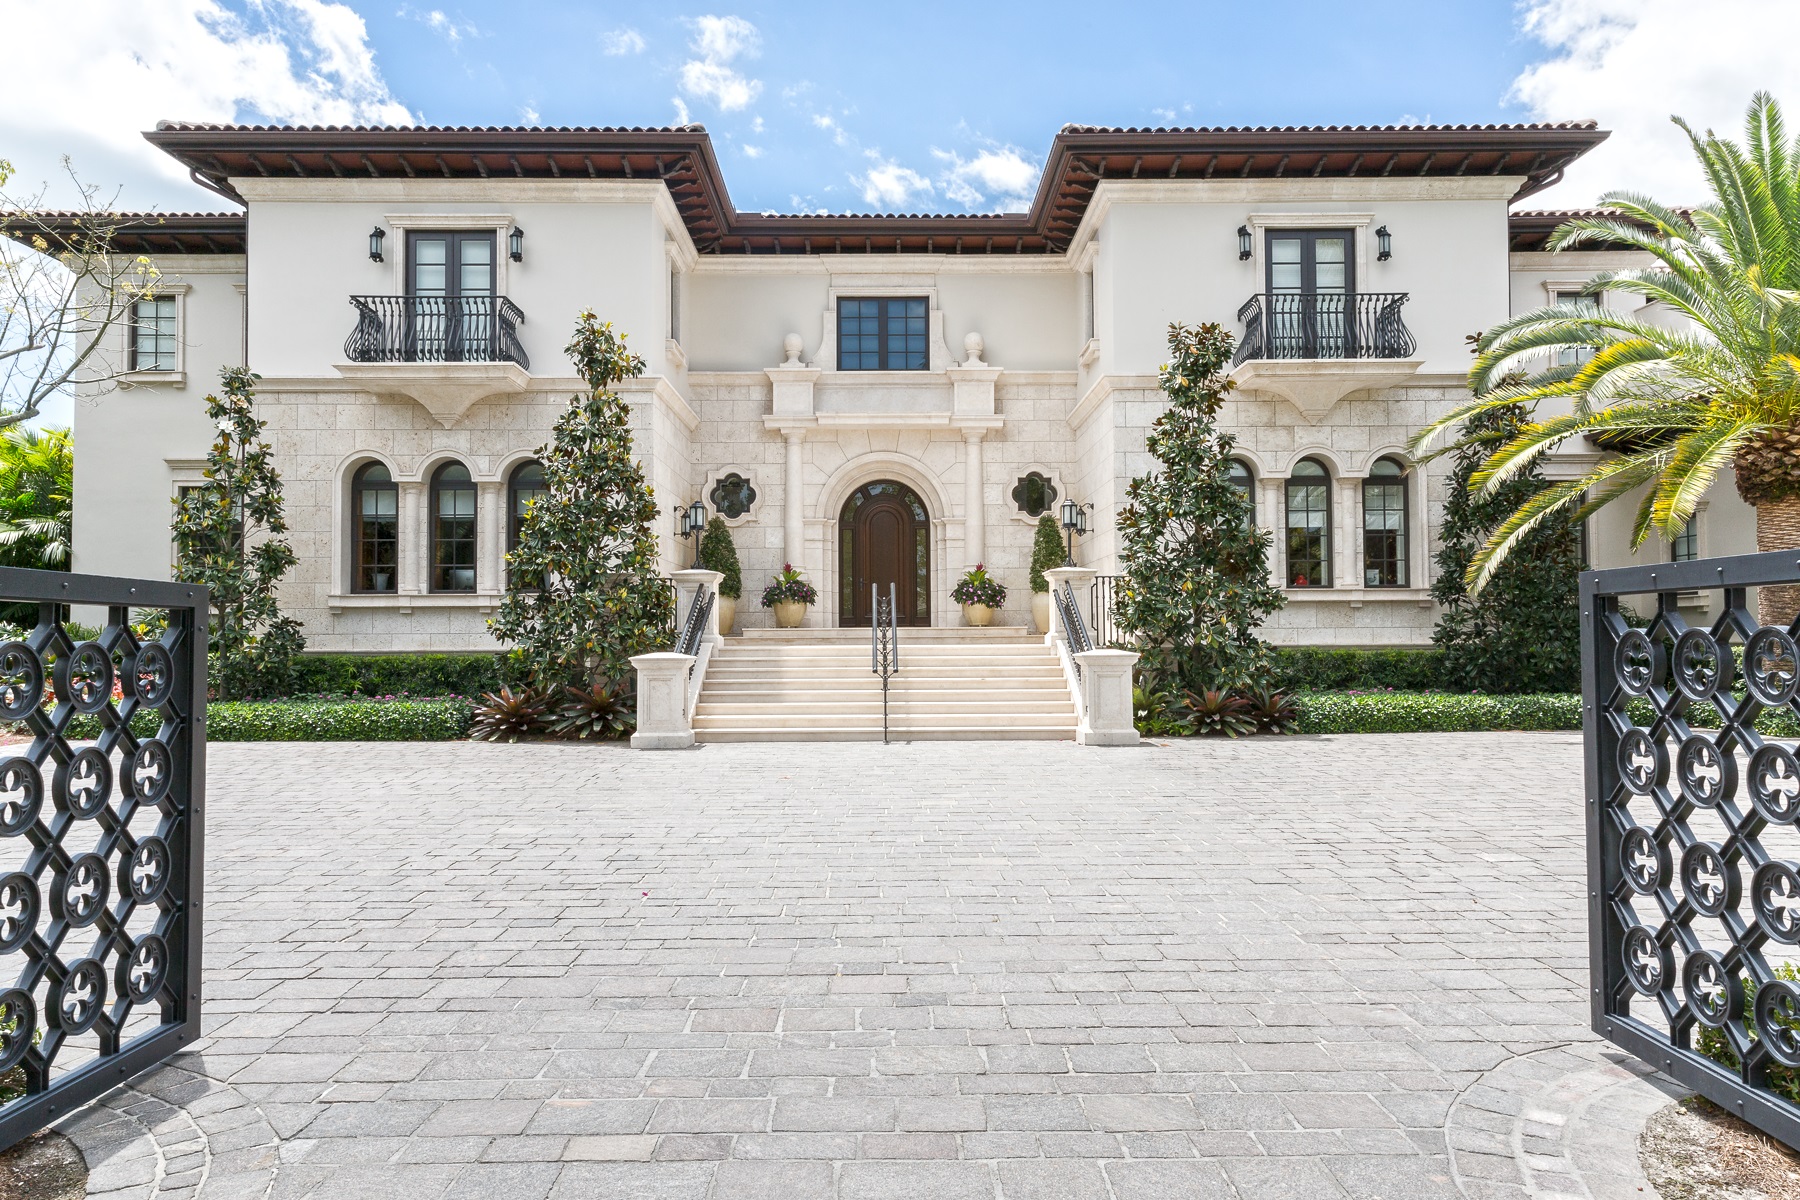 Luxury Home Sales in Miami Continue to Rise